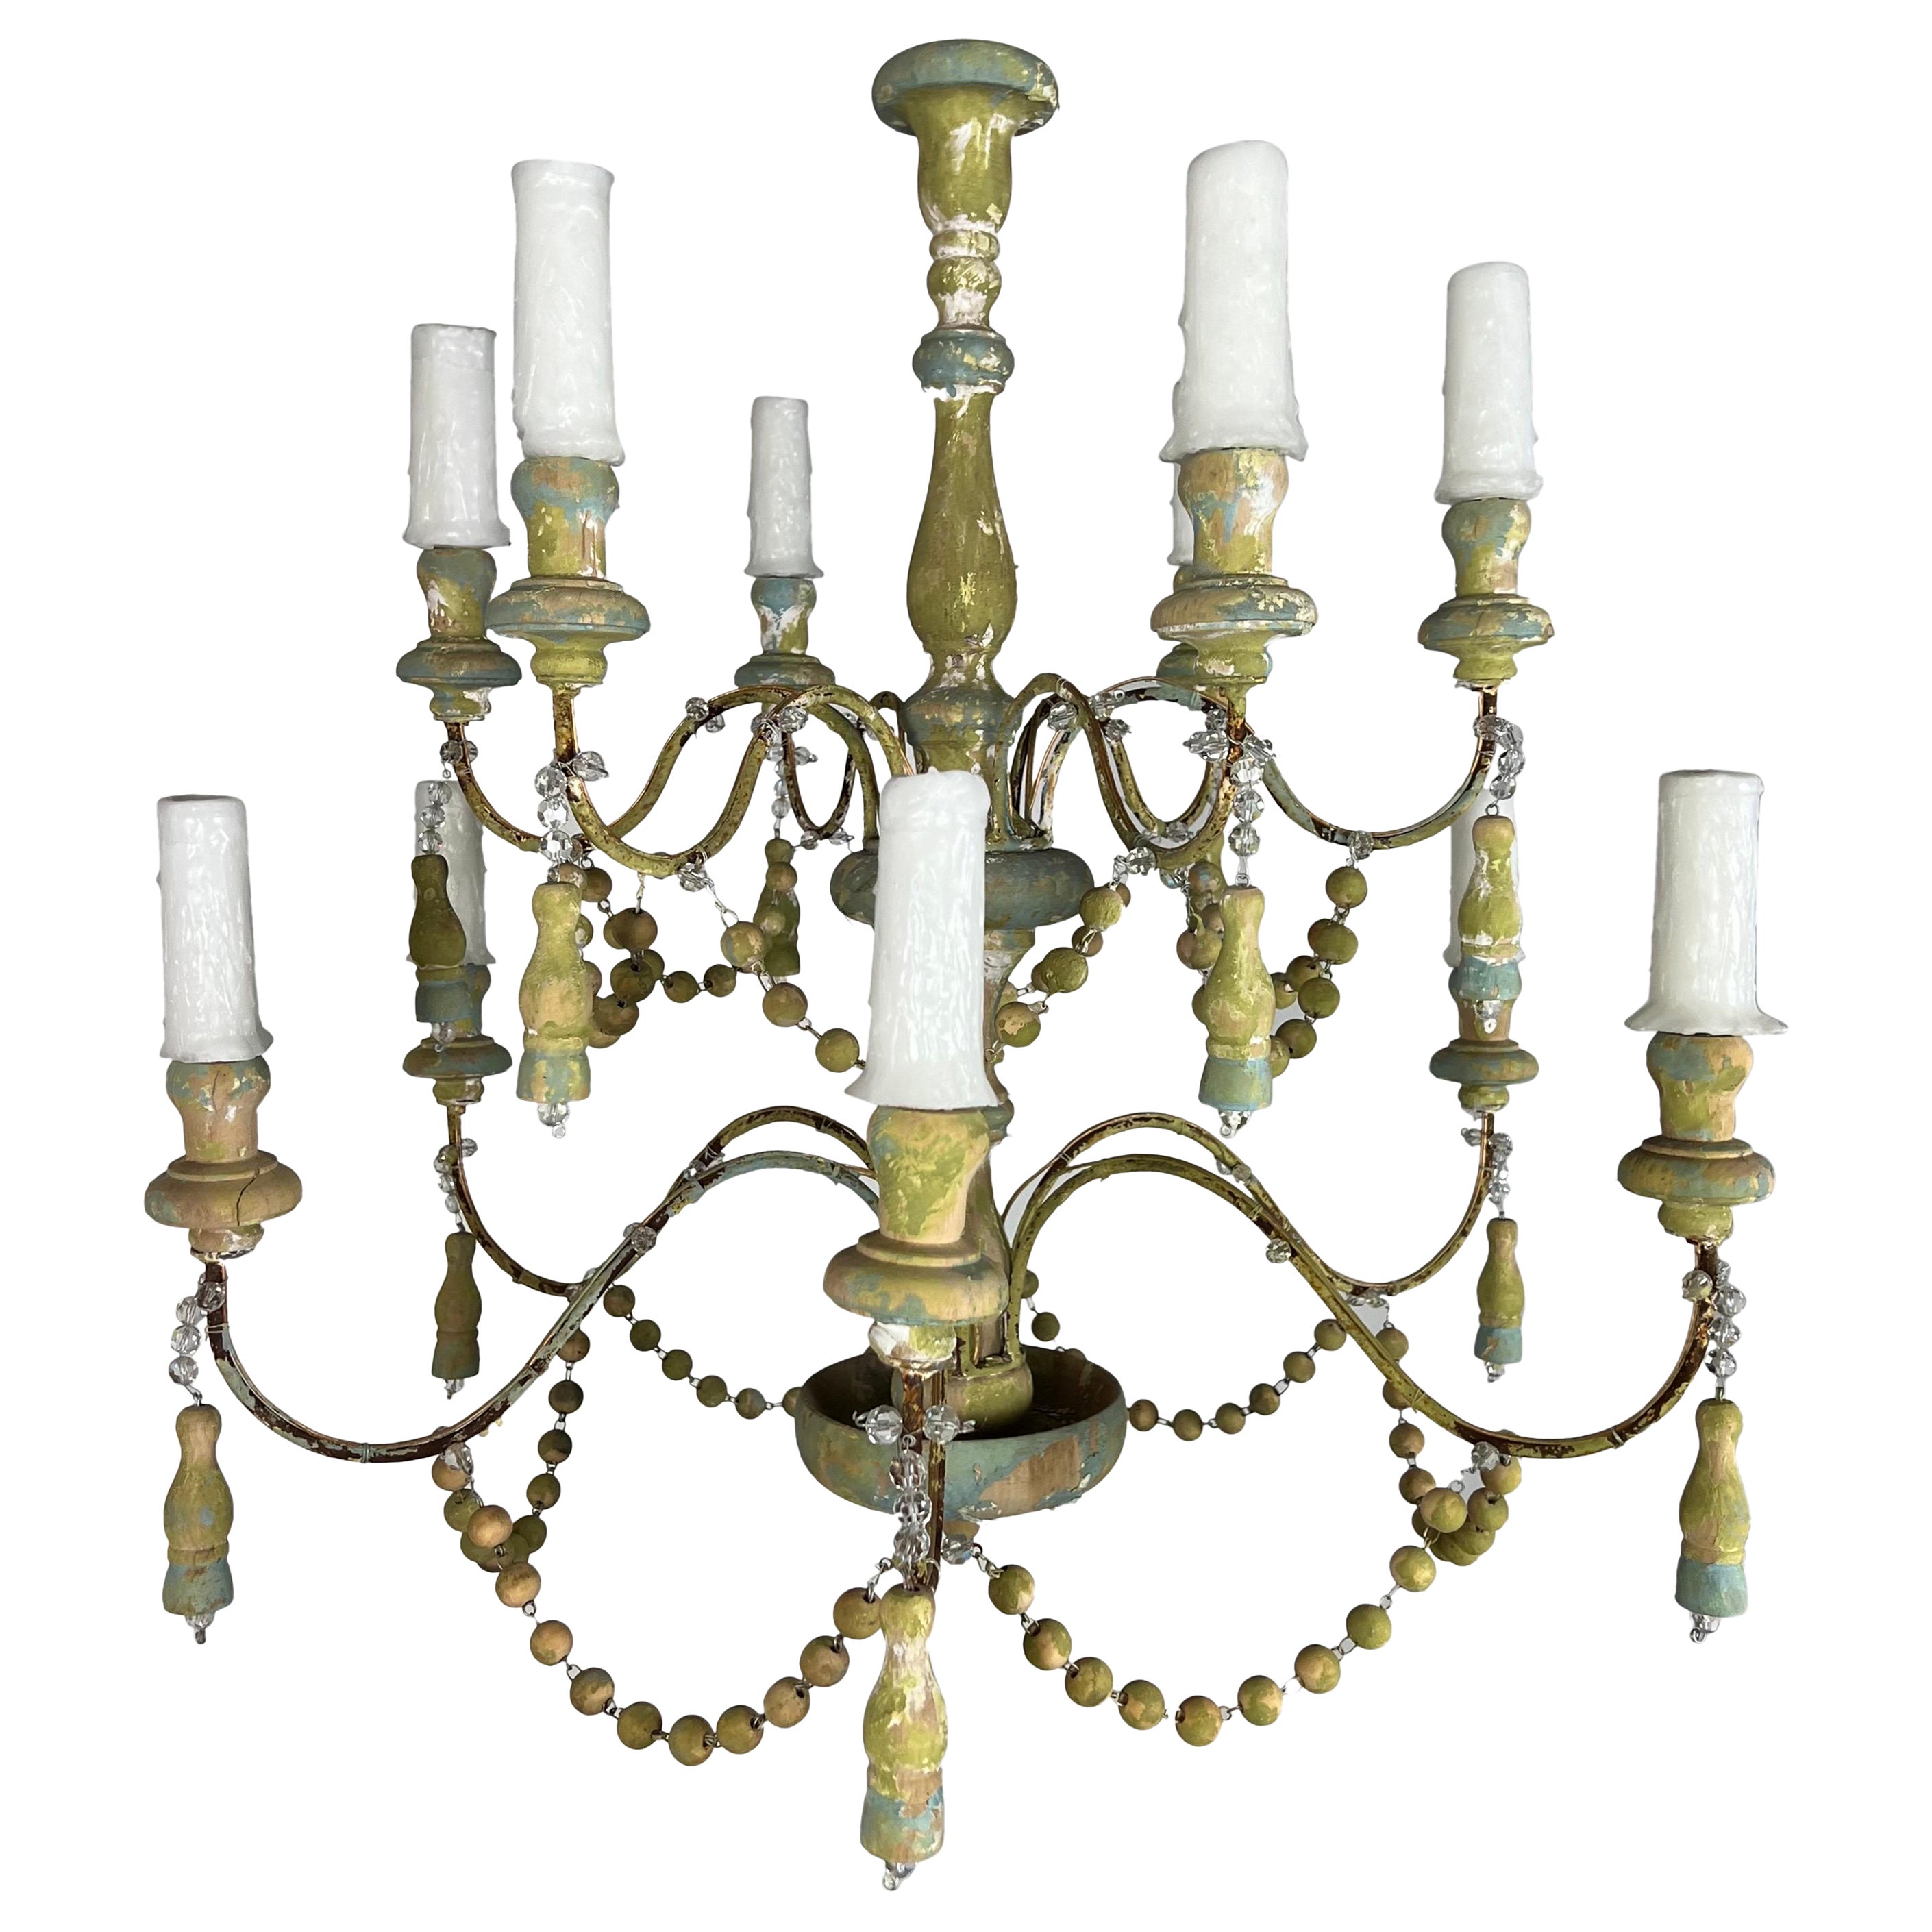 12-Arm Painted Wood Beaded Chandelier with Tassels